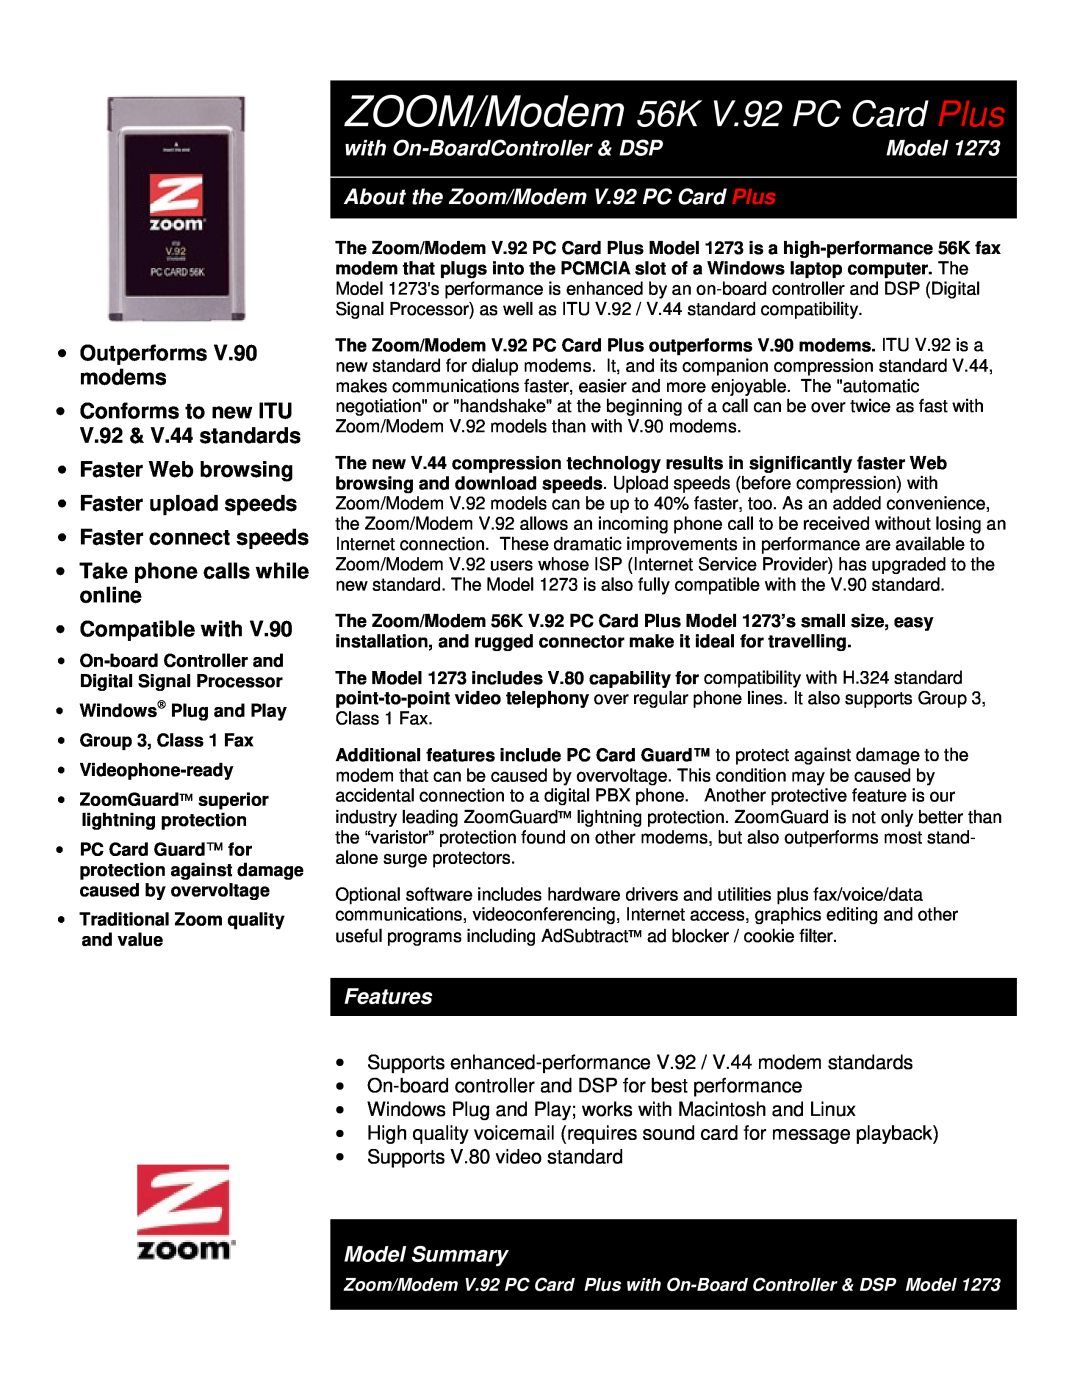 Zoom 1273 manual ZOOM/Modem 56K V.92 PC Card Plus, with On-BoardController & DSP, Features, Model Summary 